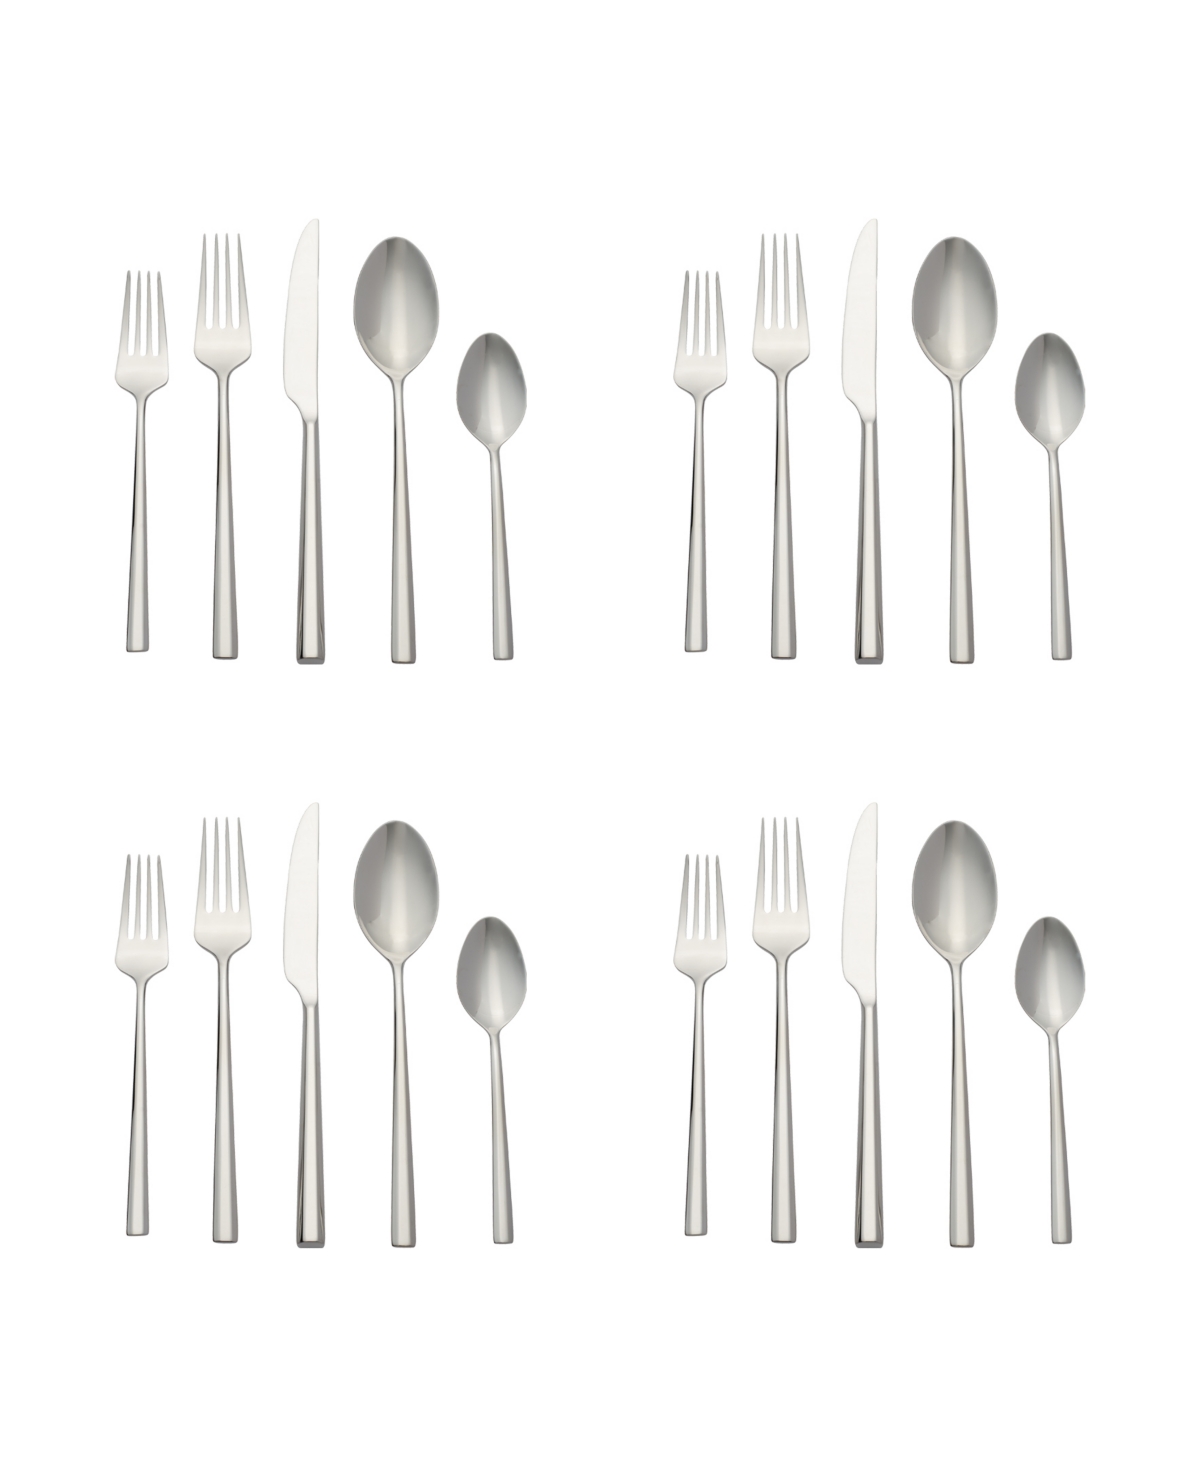 Oneida Karlek 20 Piece Everyday Flatware Set, Service For 4 In Metallic And Stainless